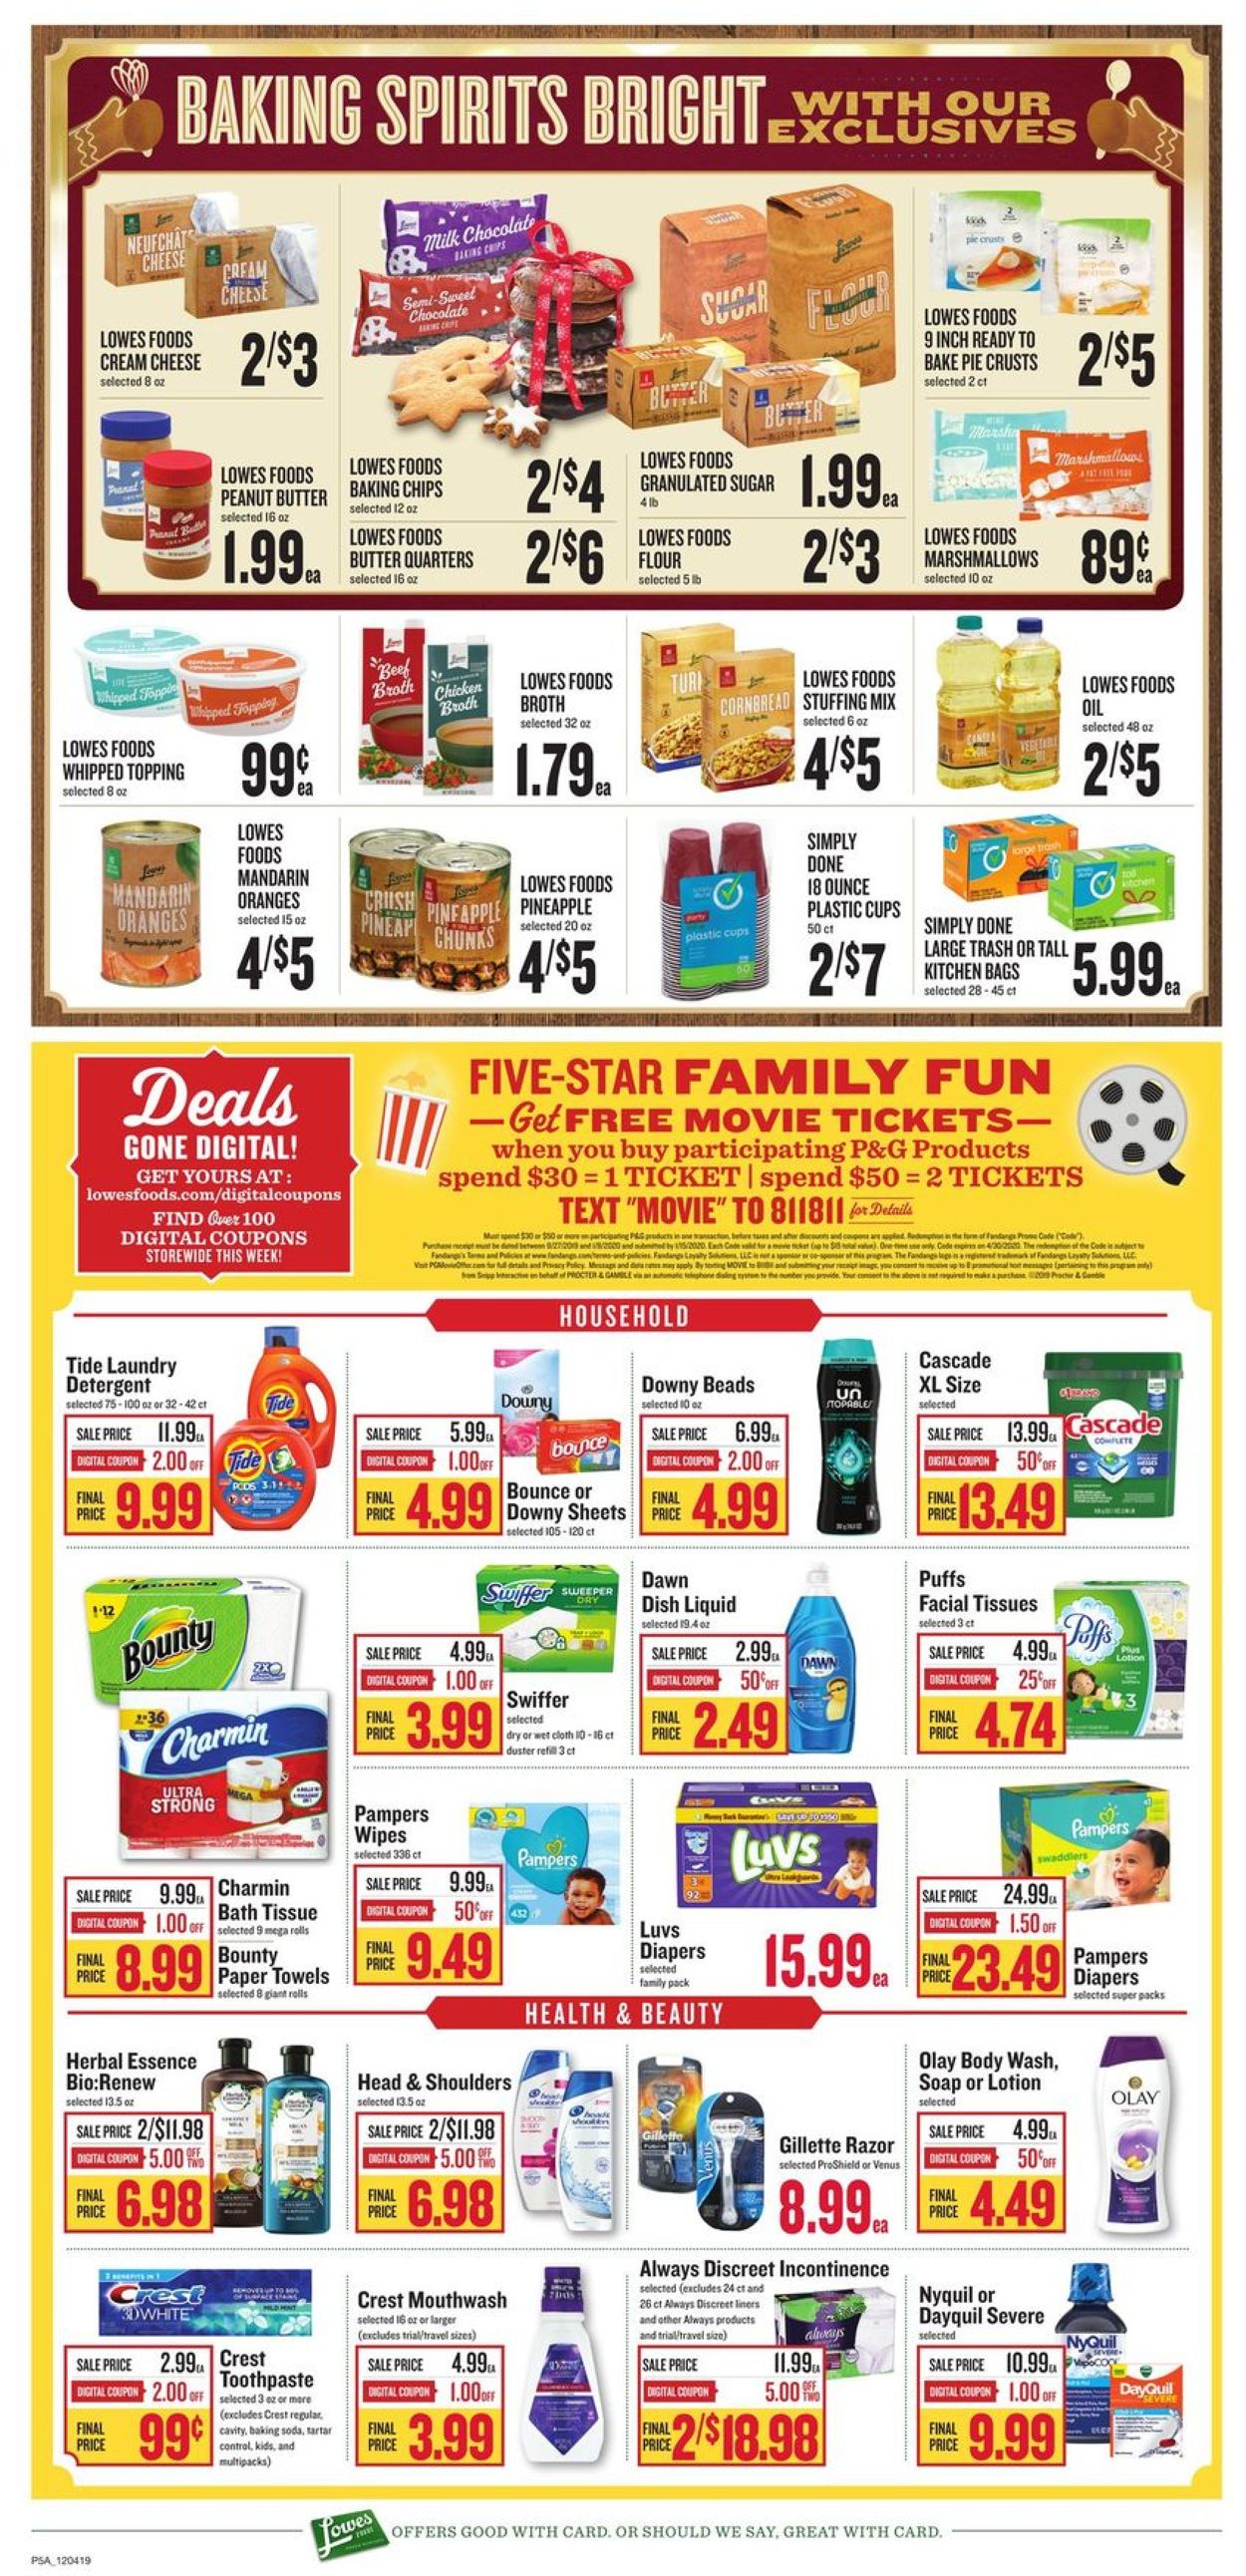 Lowes Foods Holidays Ad 2019 Current weekly ad 12/04 12/10/2019 [9